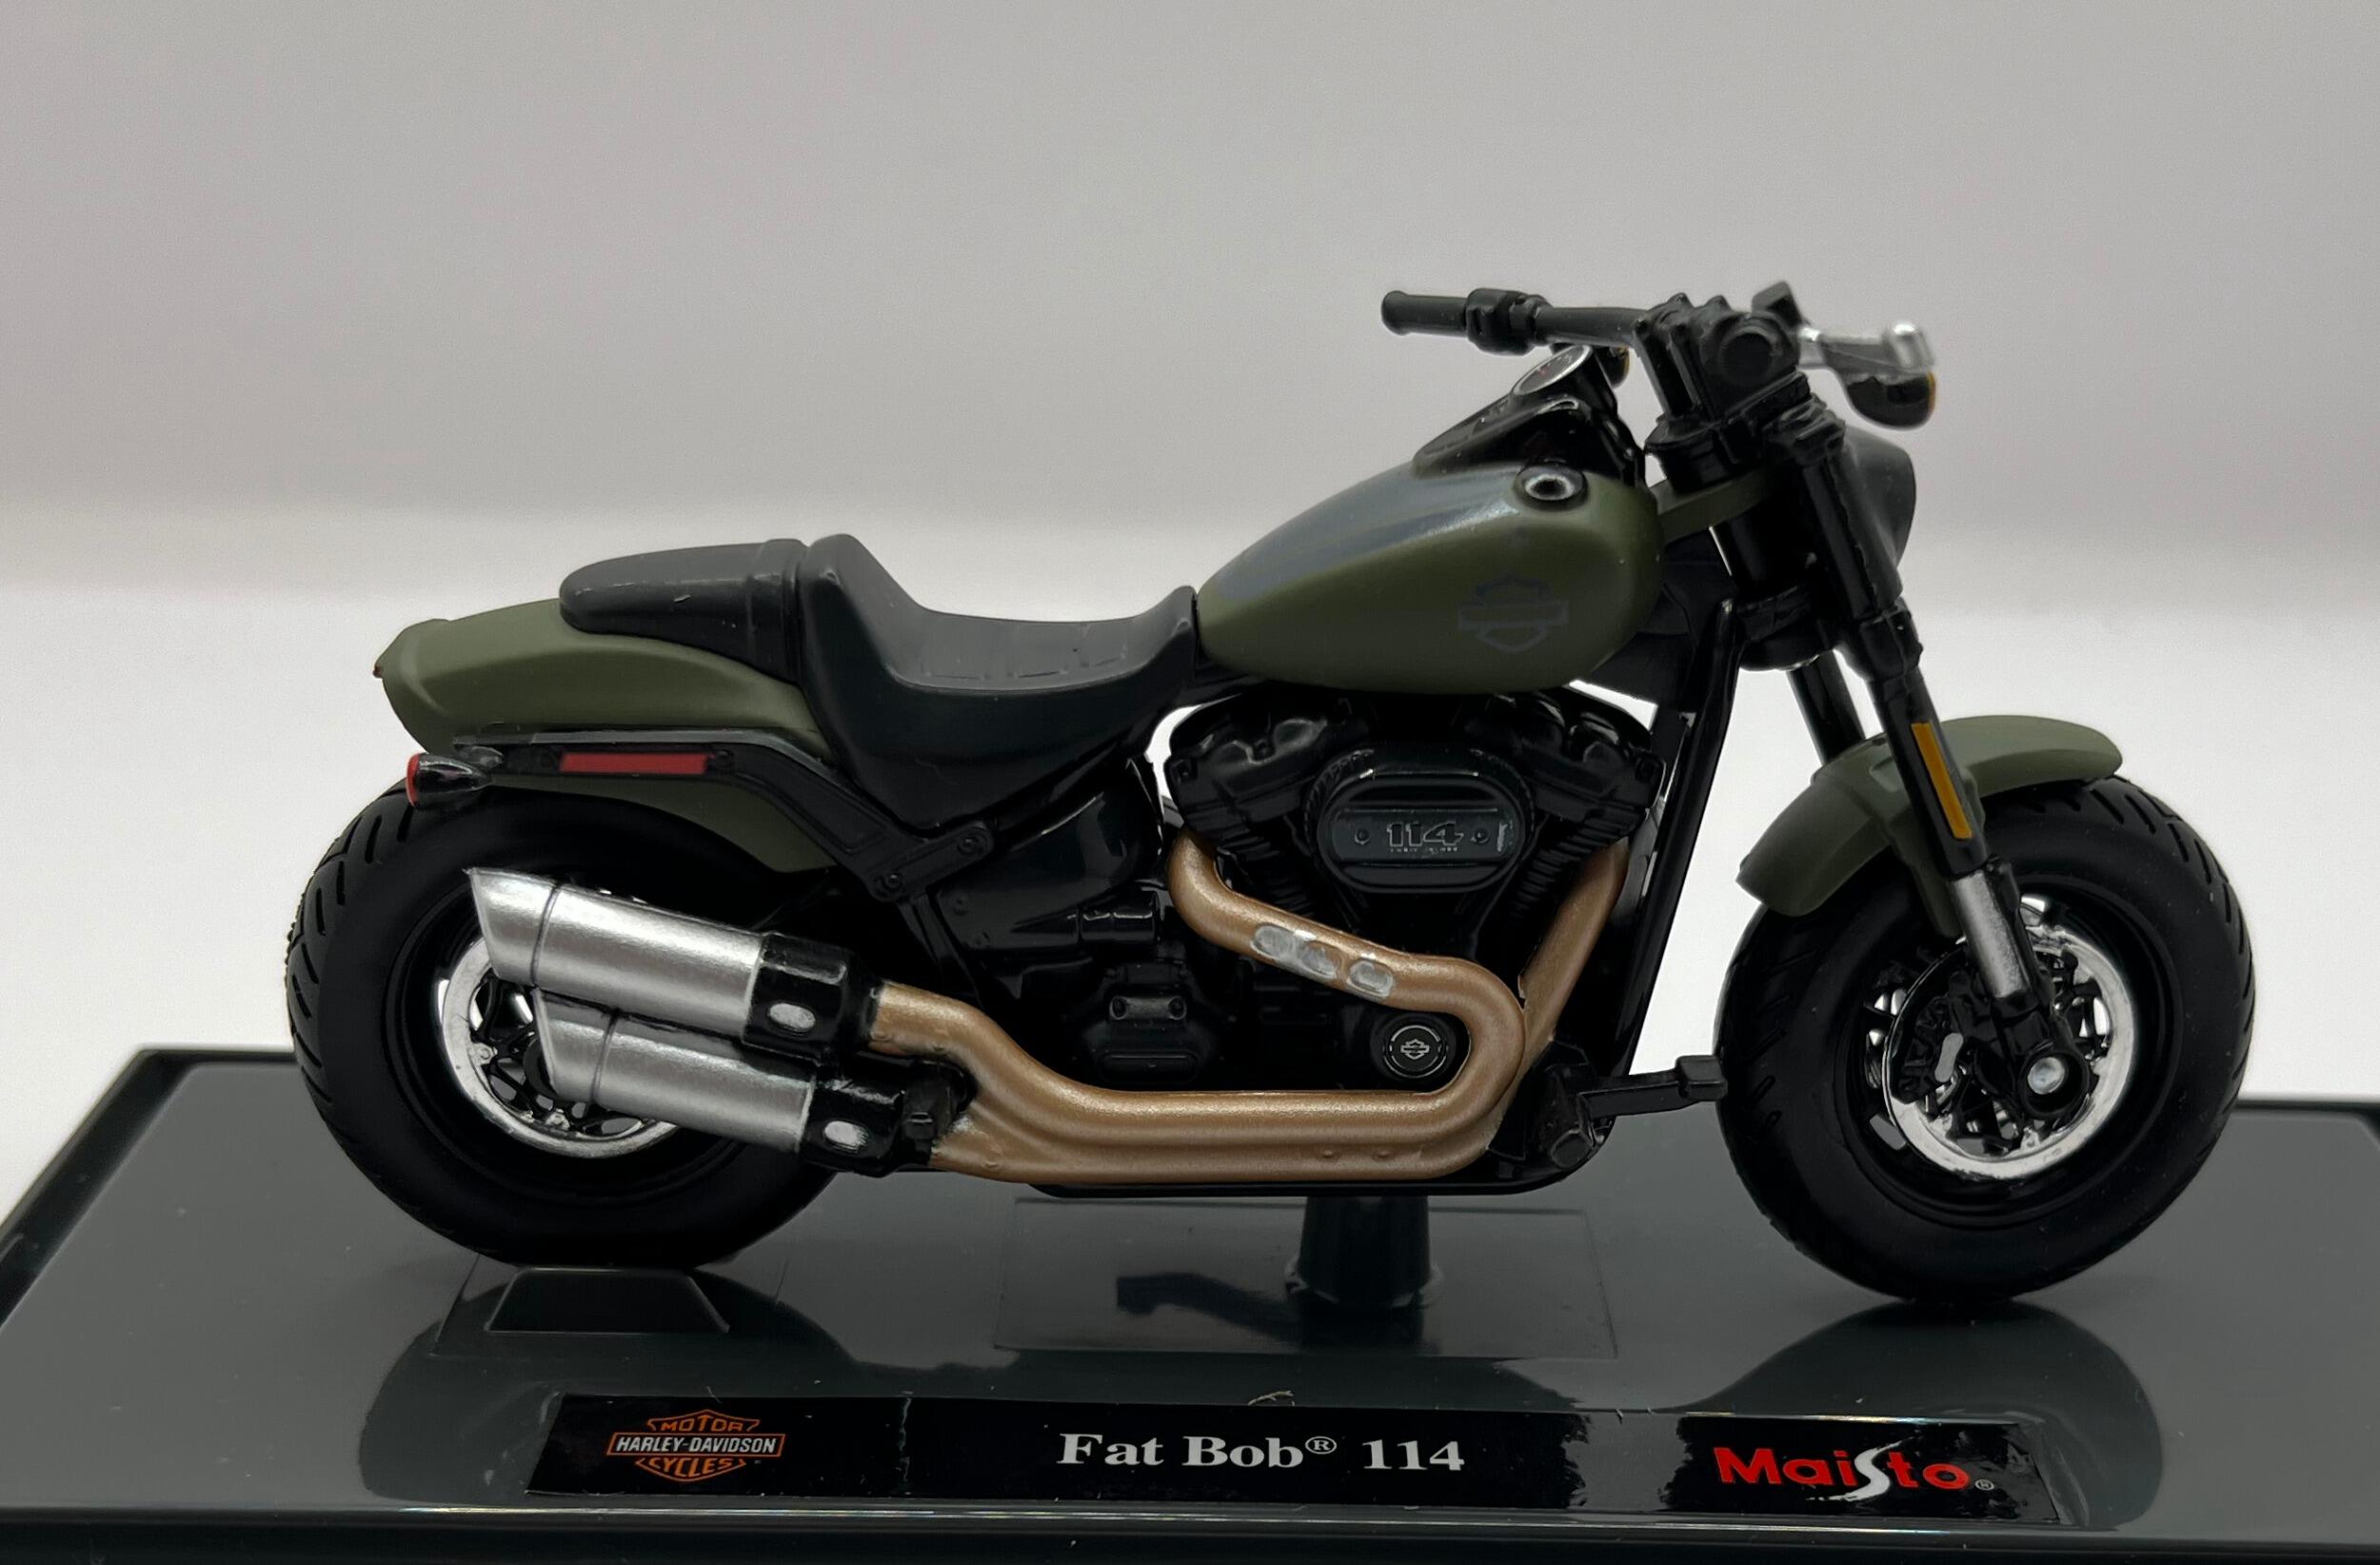 Harley Davidson Fat Bob 114 2022 in olive & black, 1:18 scale motorcycle model from Maisto, 21854